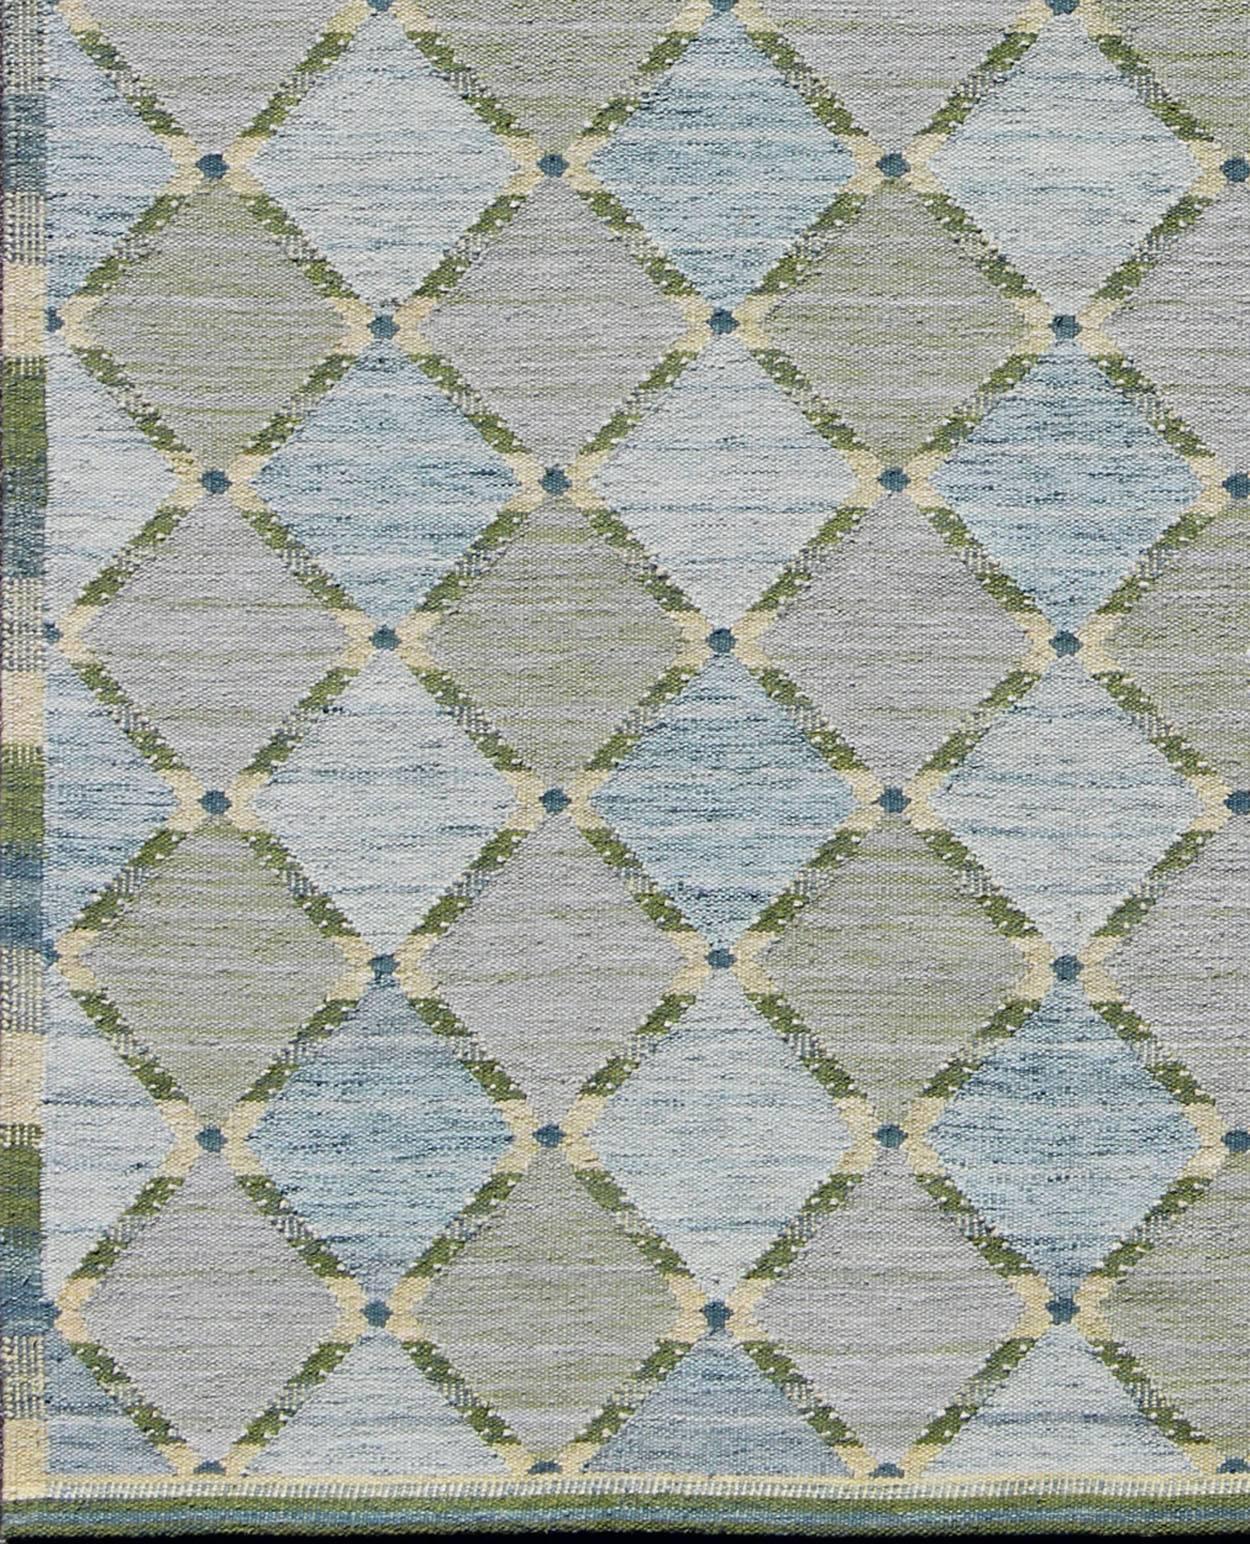 Measures: 9'5'' x 11'5''.
This Scandinavian flat-weave patterned rug is inspired by the work of Swedish textile designers of the early to mid-20th century. With a unique blend of historical and modern design, this dynamic and exciting composition is